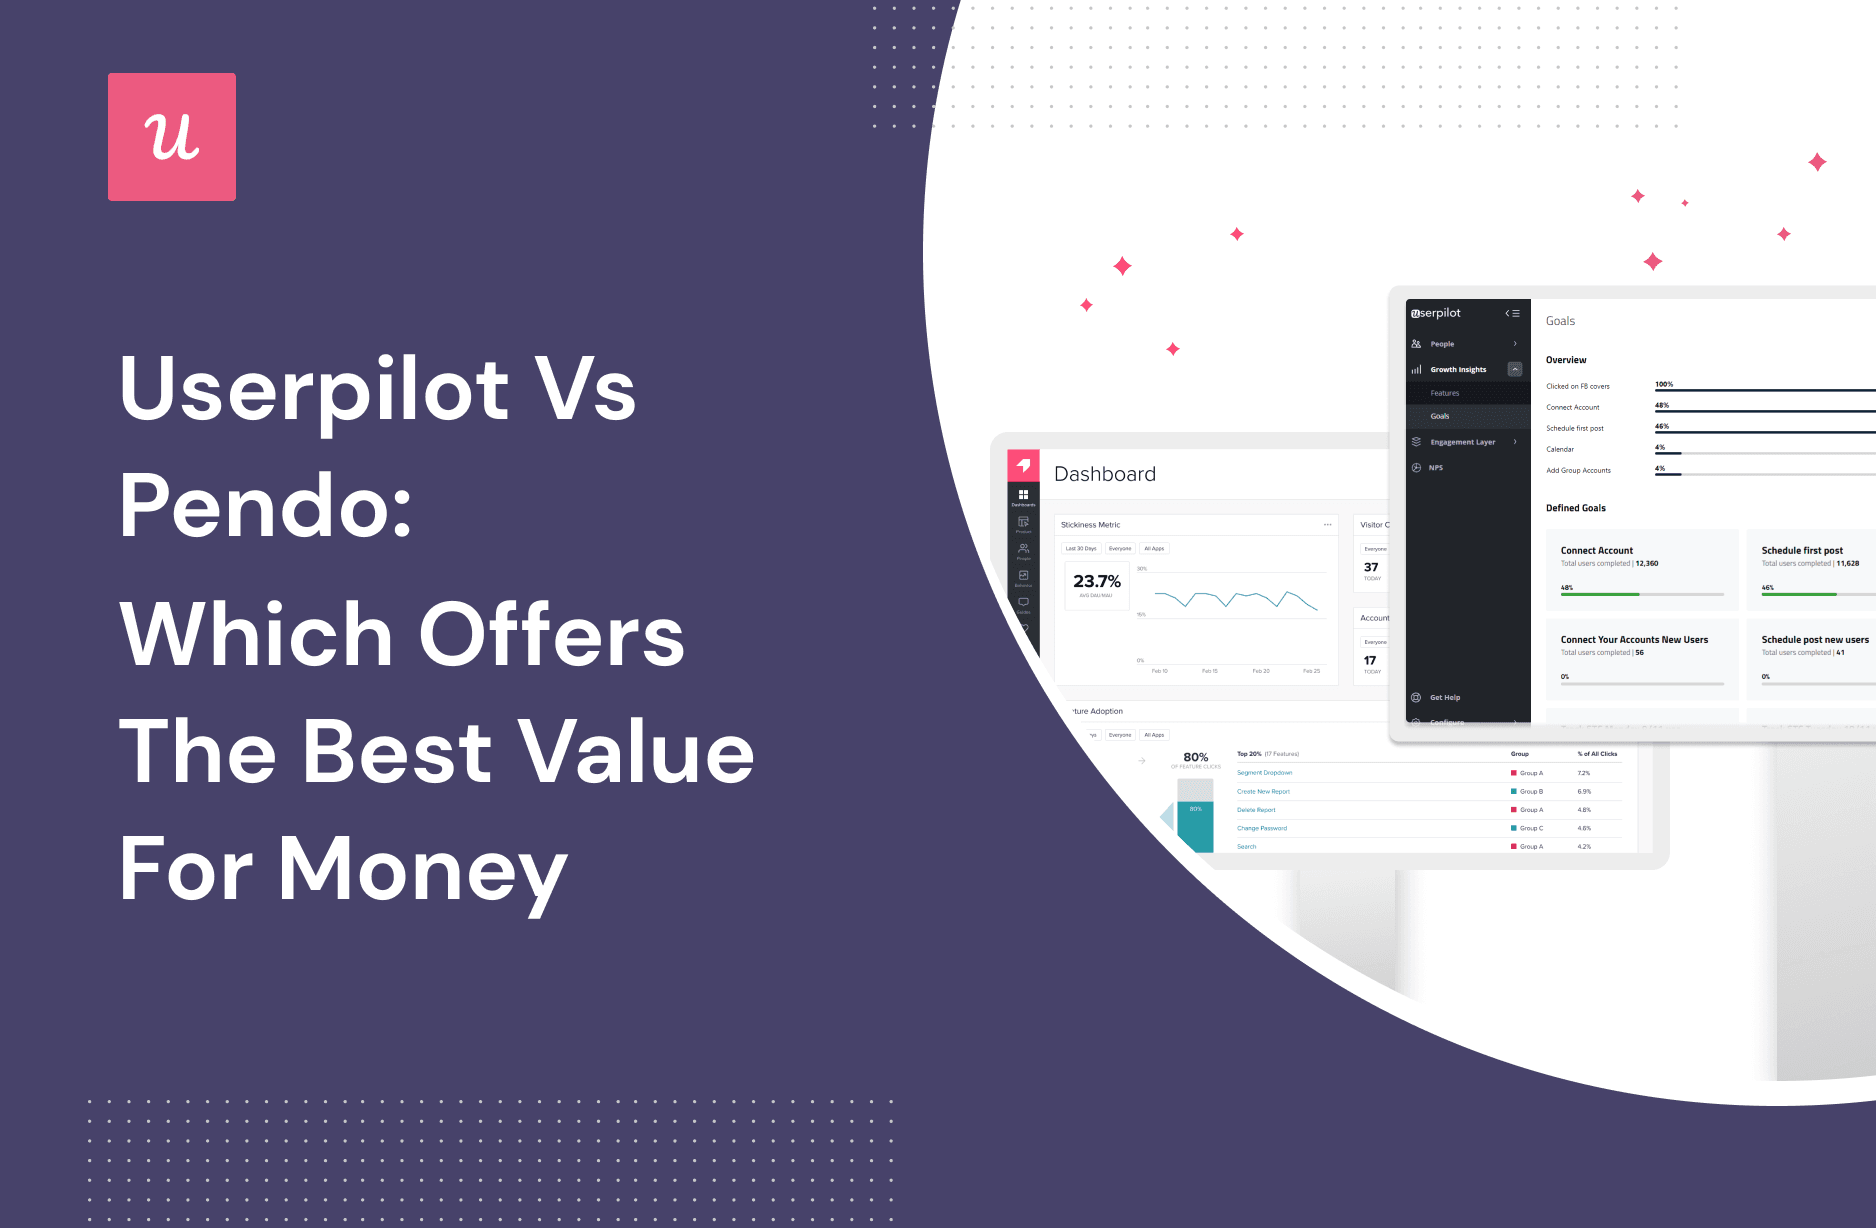 Pendo vs Userpilot: Which Offers The Best Value For Money